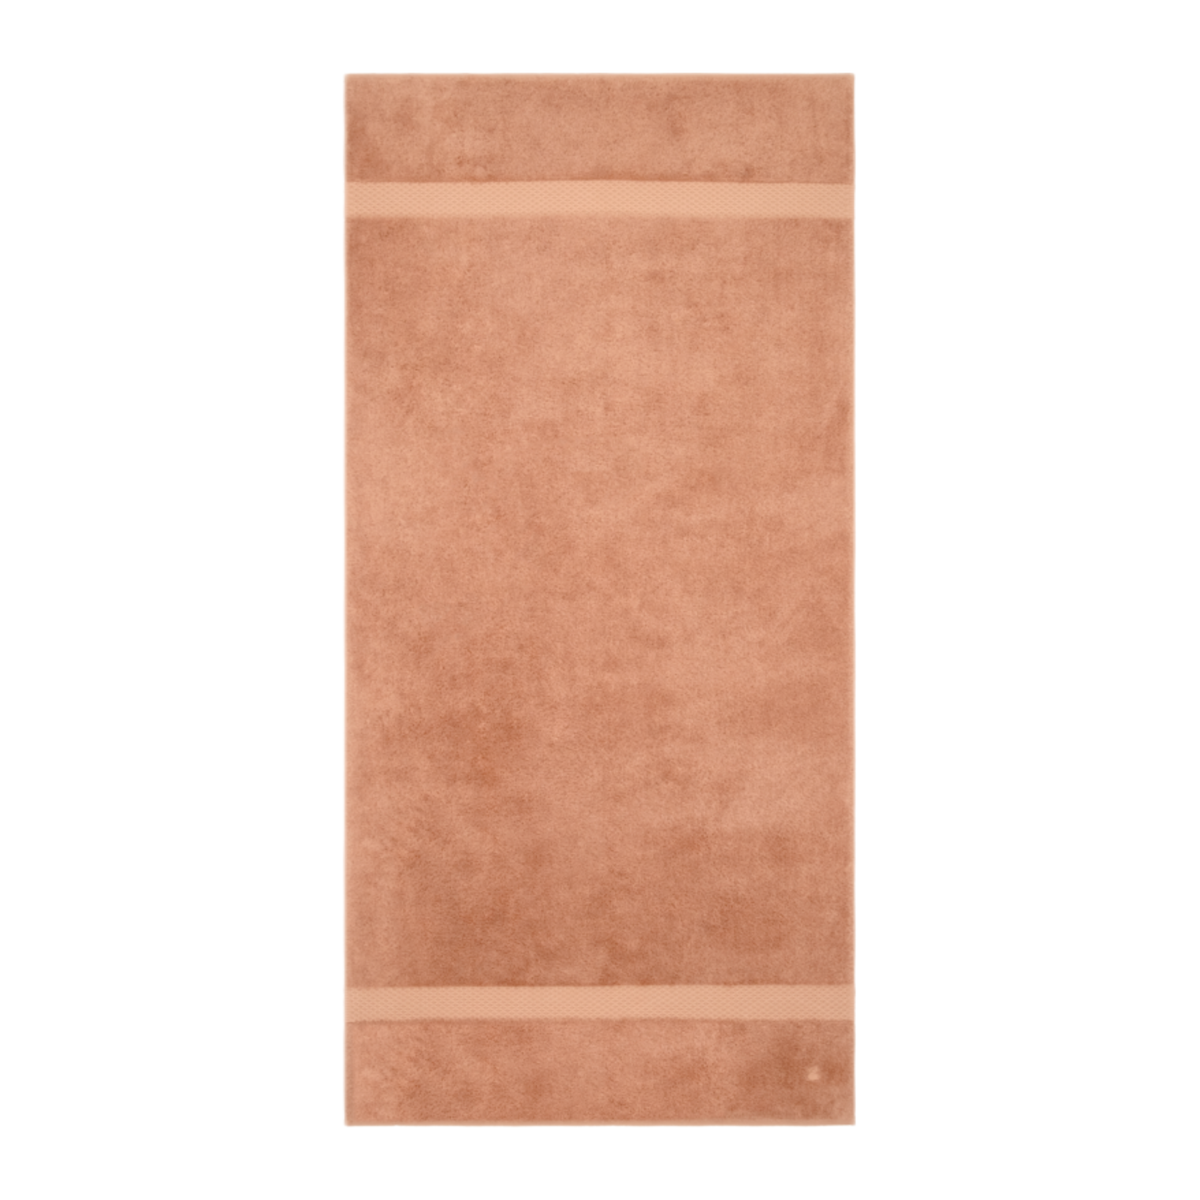 Bath Sheet of Yves Delorme Etoile Bath Collection in Sienna Color